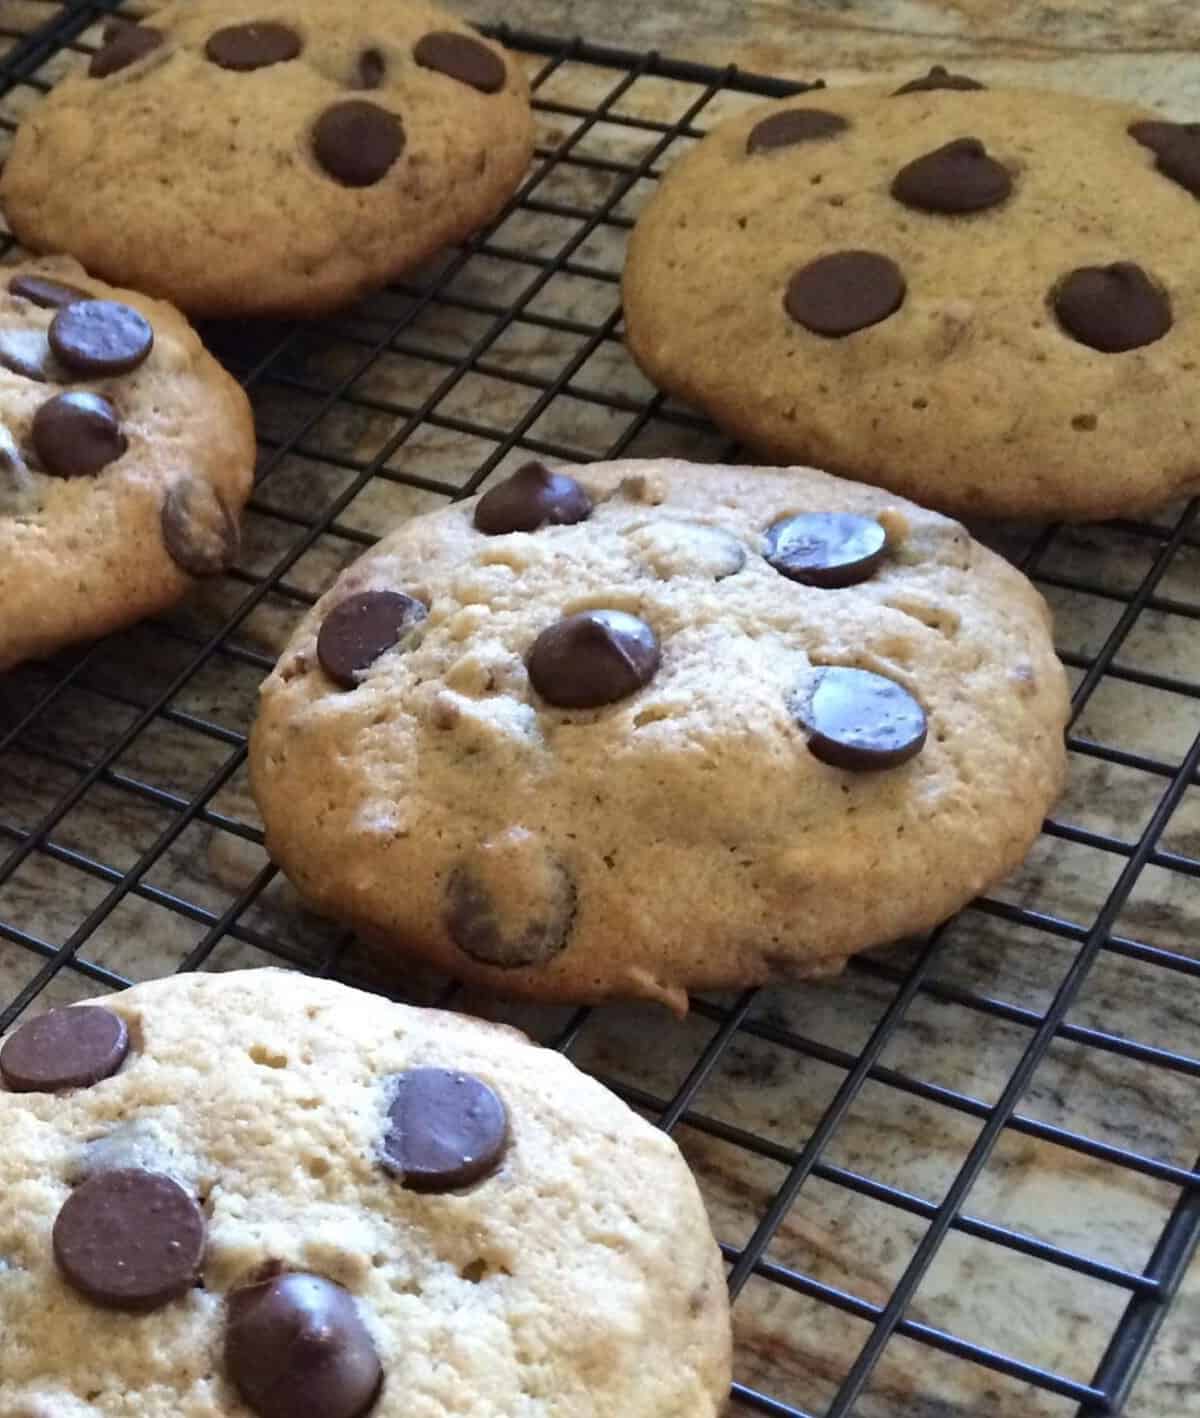  Tasty and chewy, these cookies are perfect for satisfying your sweet tooth